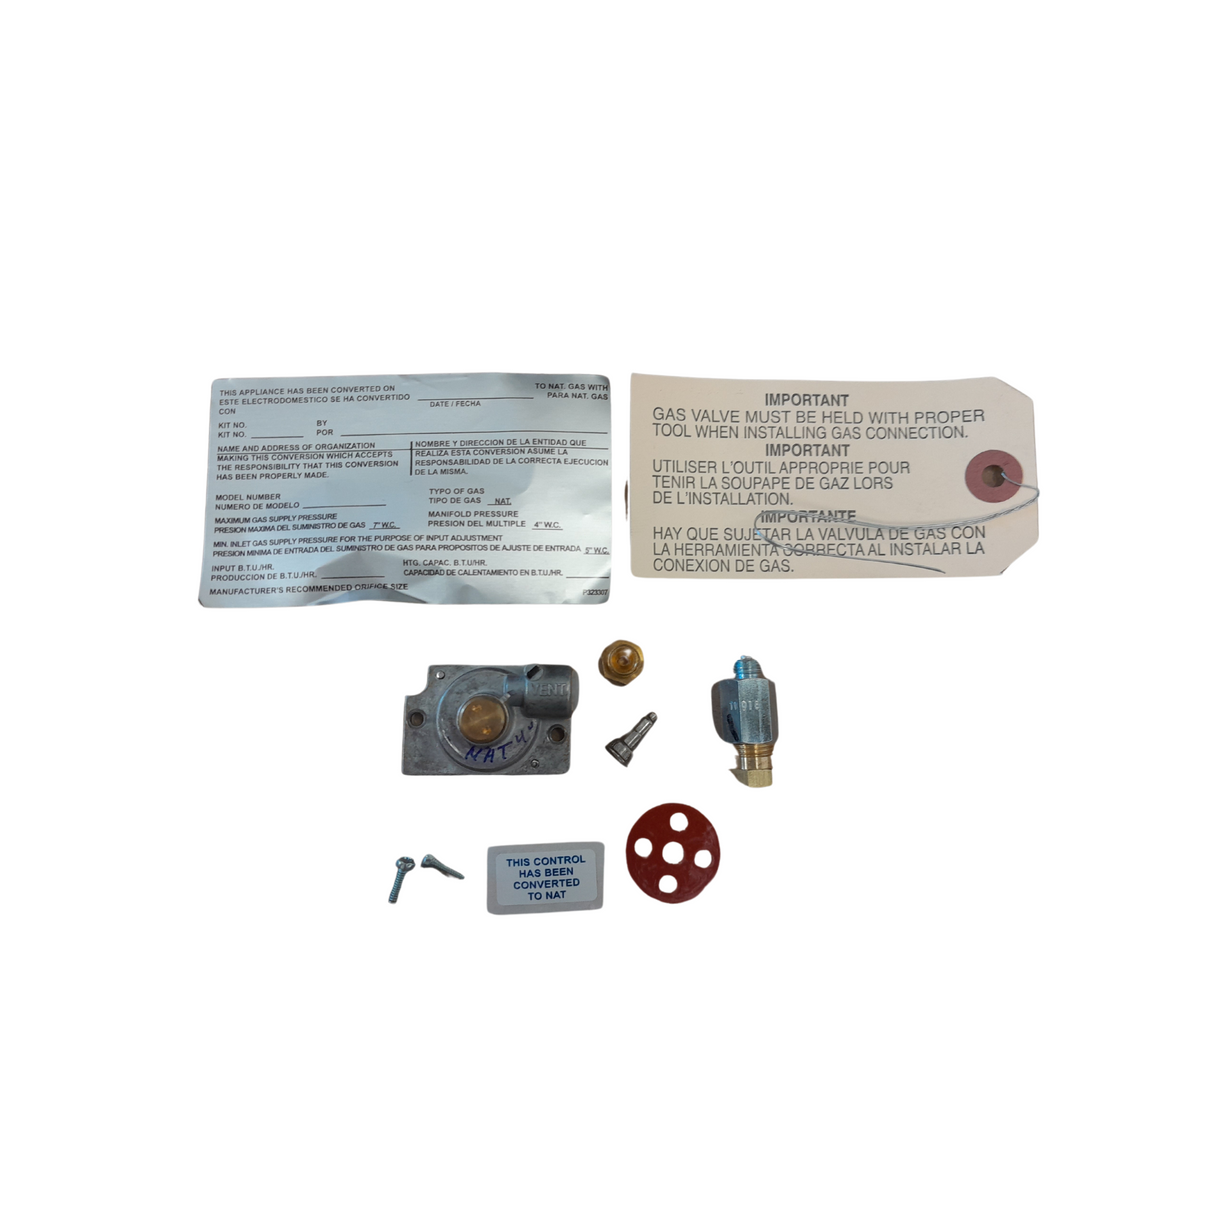 Williams Furnace Co 8904 Conversion Kit (limited availability)